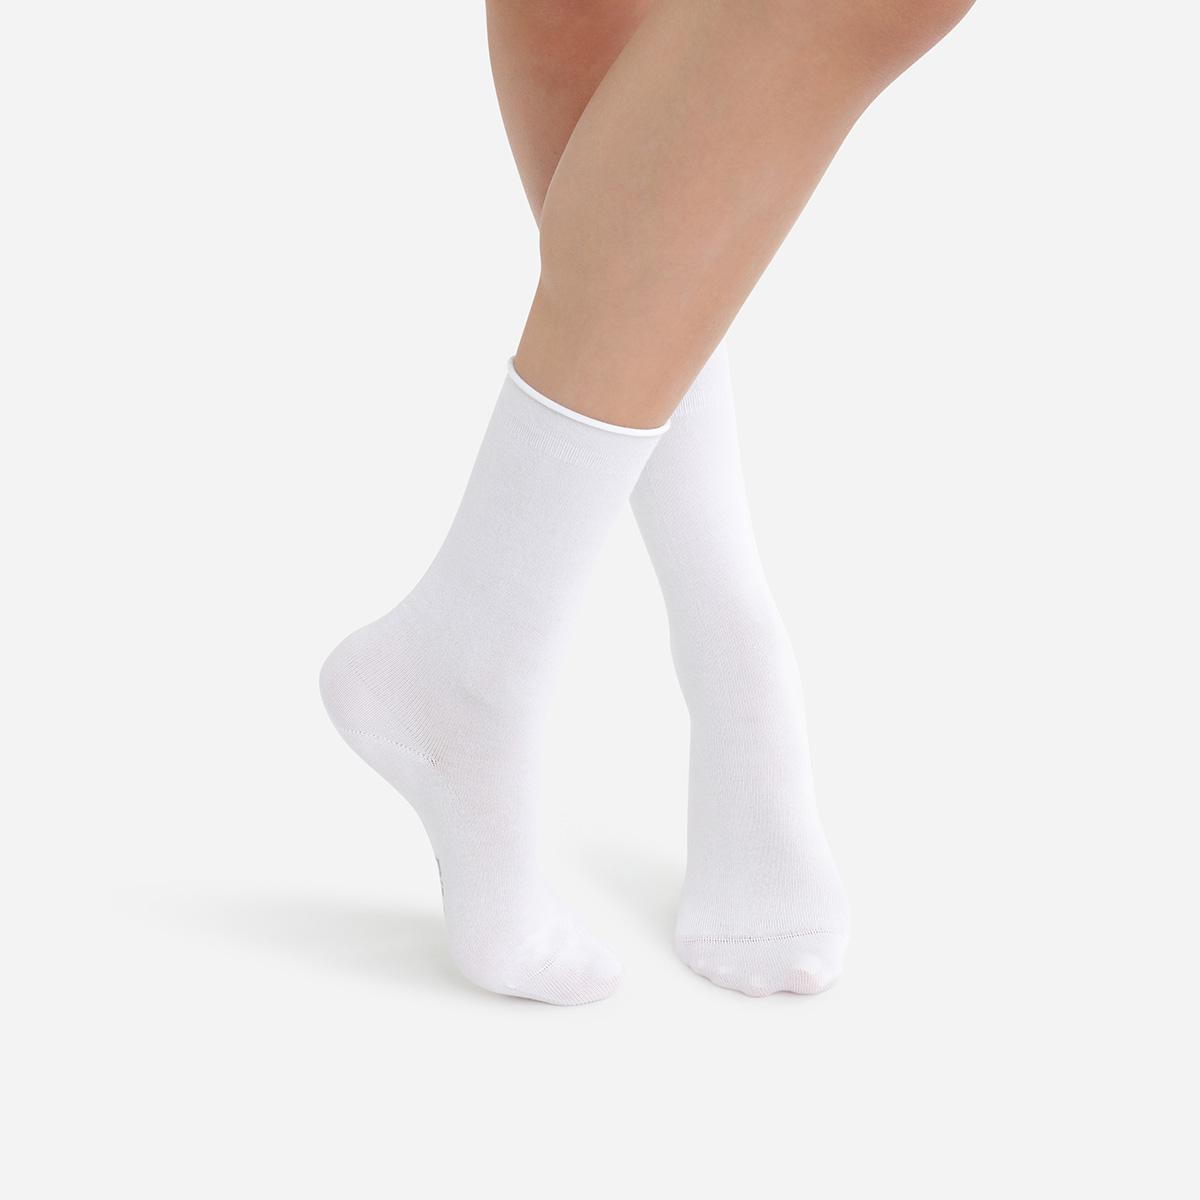 Why Are Socks So Important To Good Foot Health? - Sutherland Podiatry